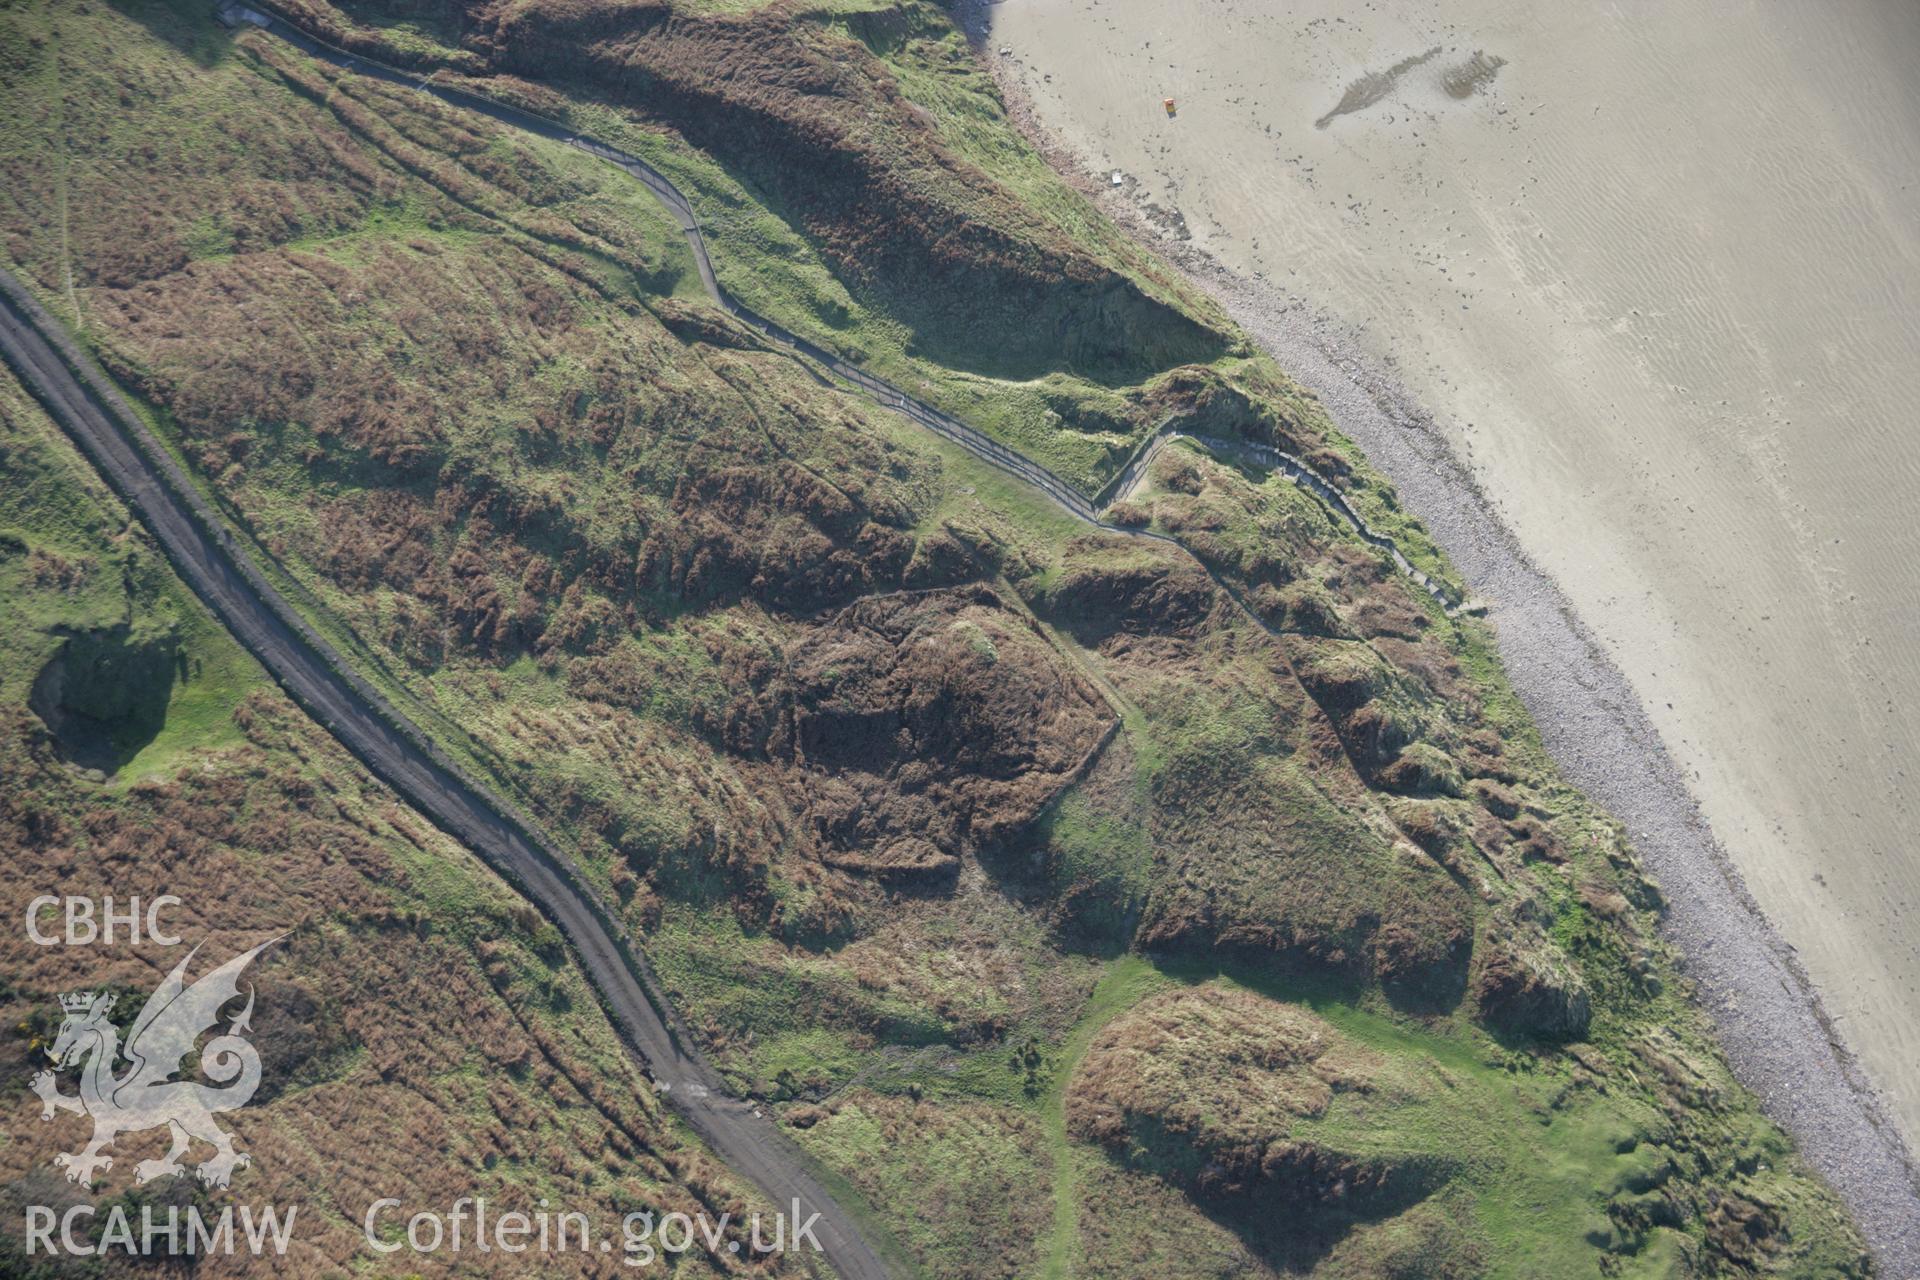 RCAHMW colour oblique aerial photograph of Rhossili Medieval Settlement from the north-east. Taken on 26 January 2006 by Toby Driver.